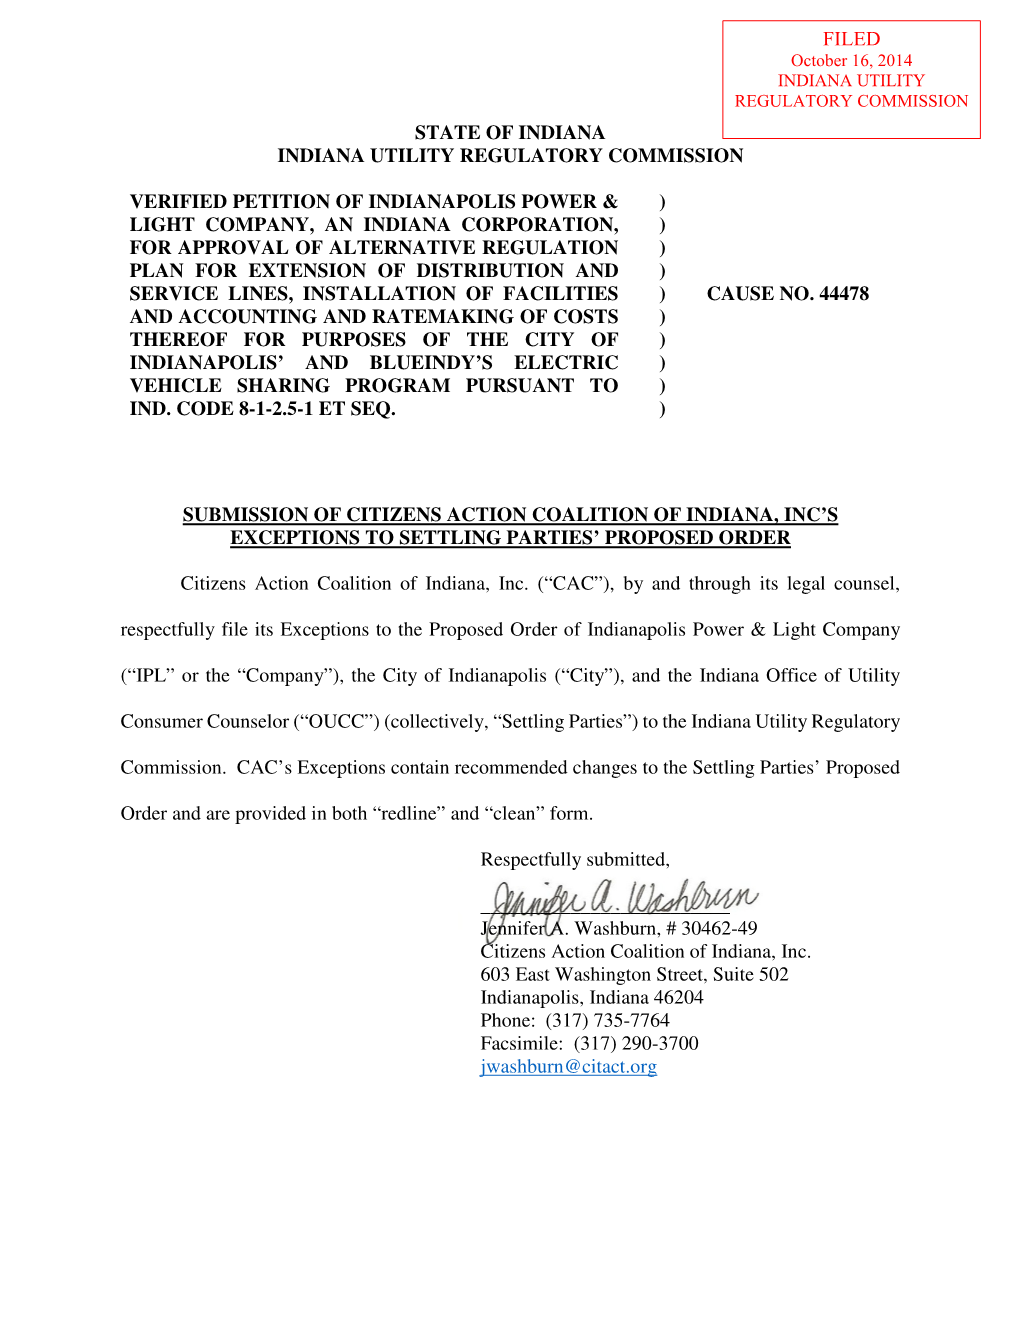 State of Indiana Indiana Utility Regulatory Commission Verified Petition of Indianapolis Power & Light Company, an Indiana C